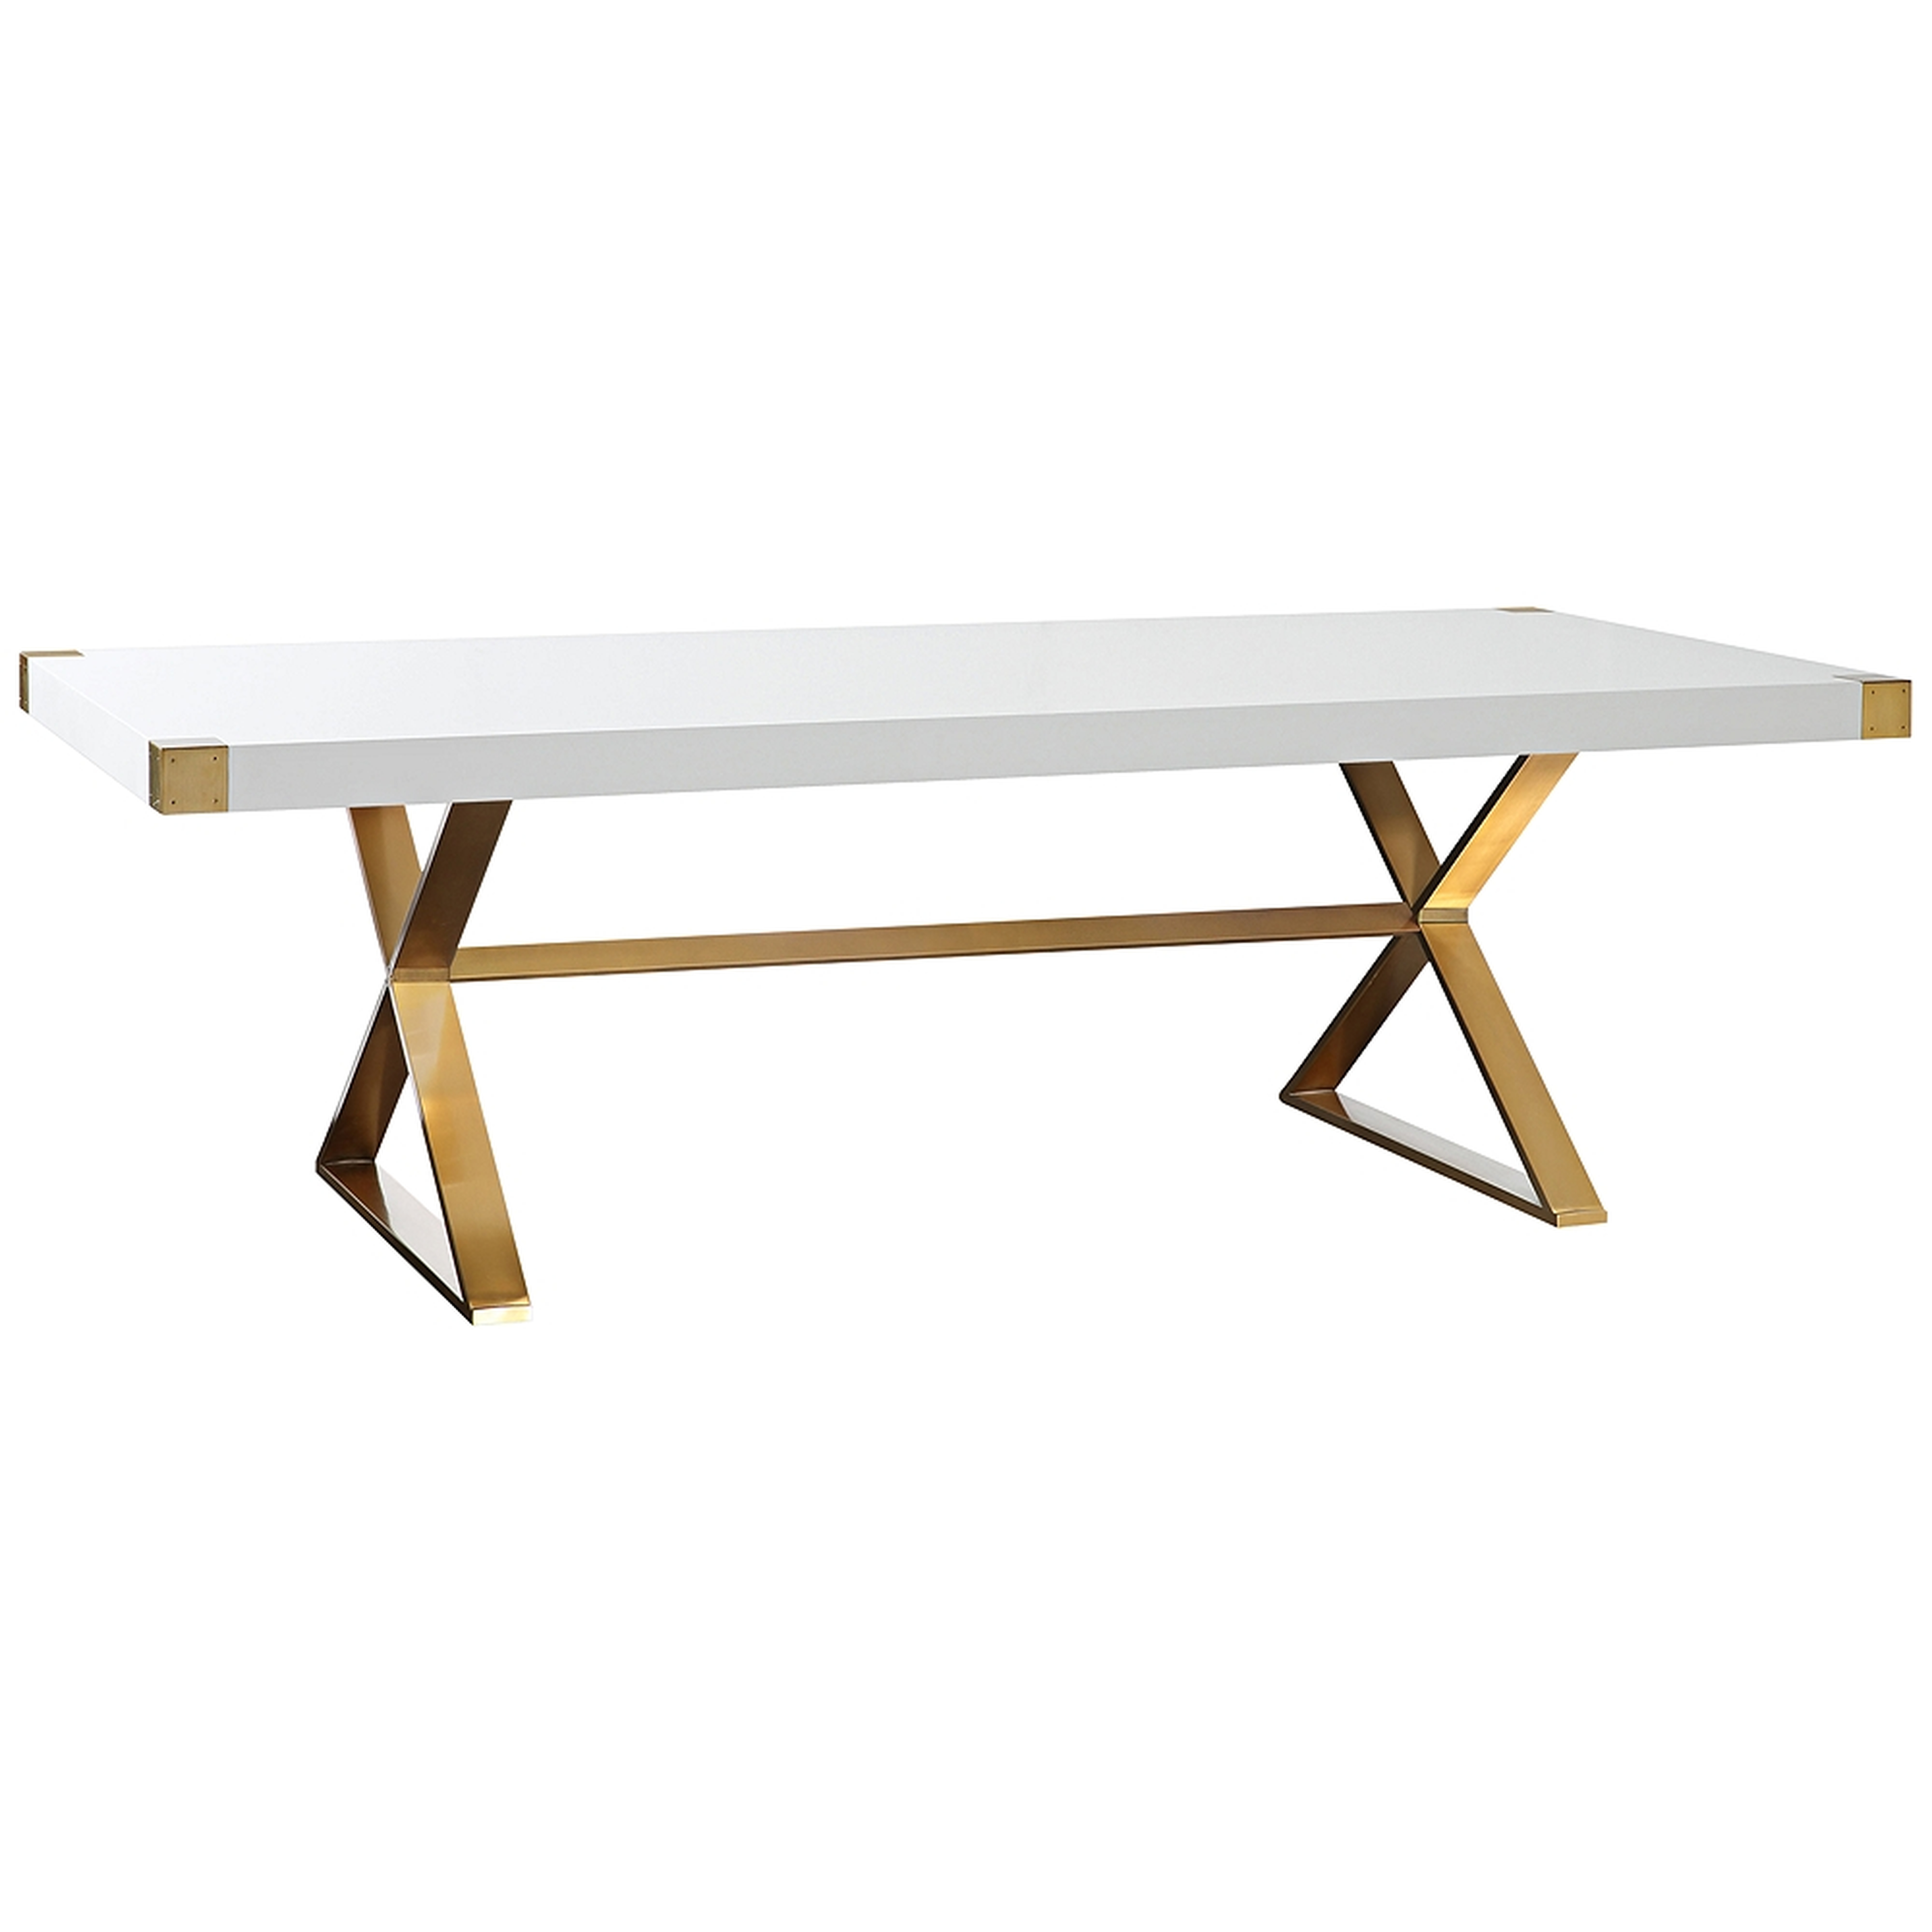 Adeline 96"W High Gloss White Lacquer and Gold Dining Table - Style # 34P20 - Lamps Plus